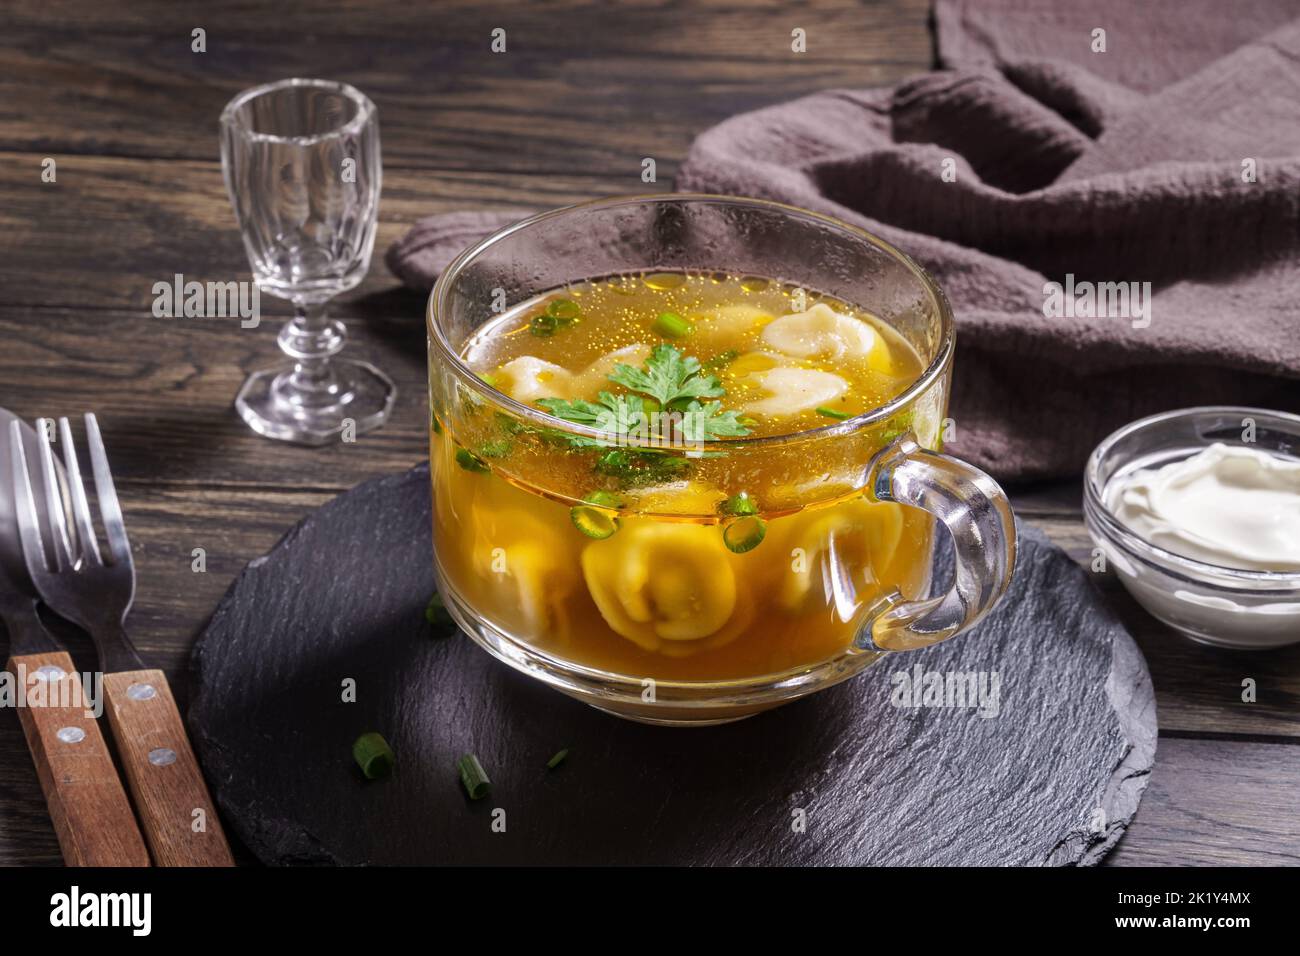 Fresh broth with dumplings in glass bowl on table closeup Stock Photo